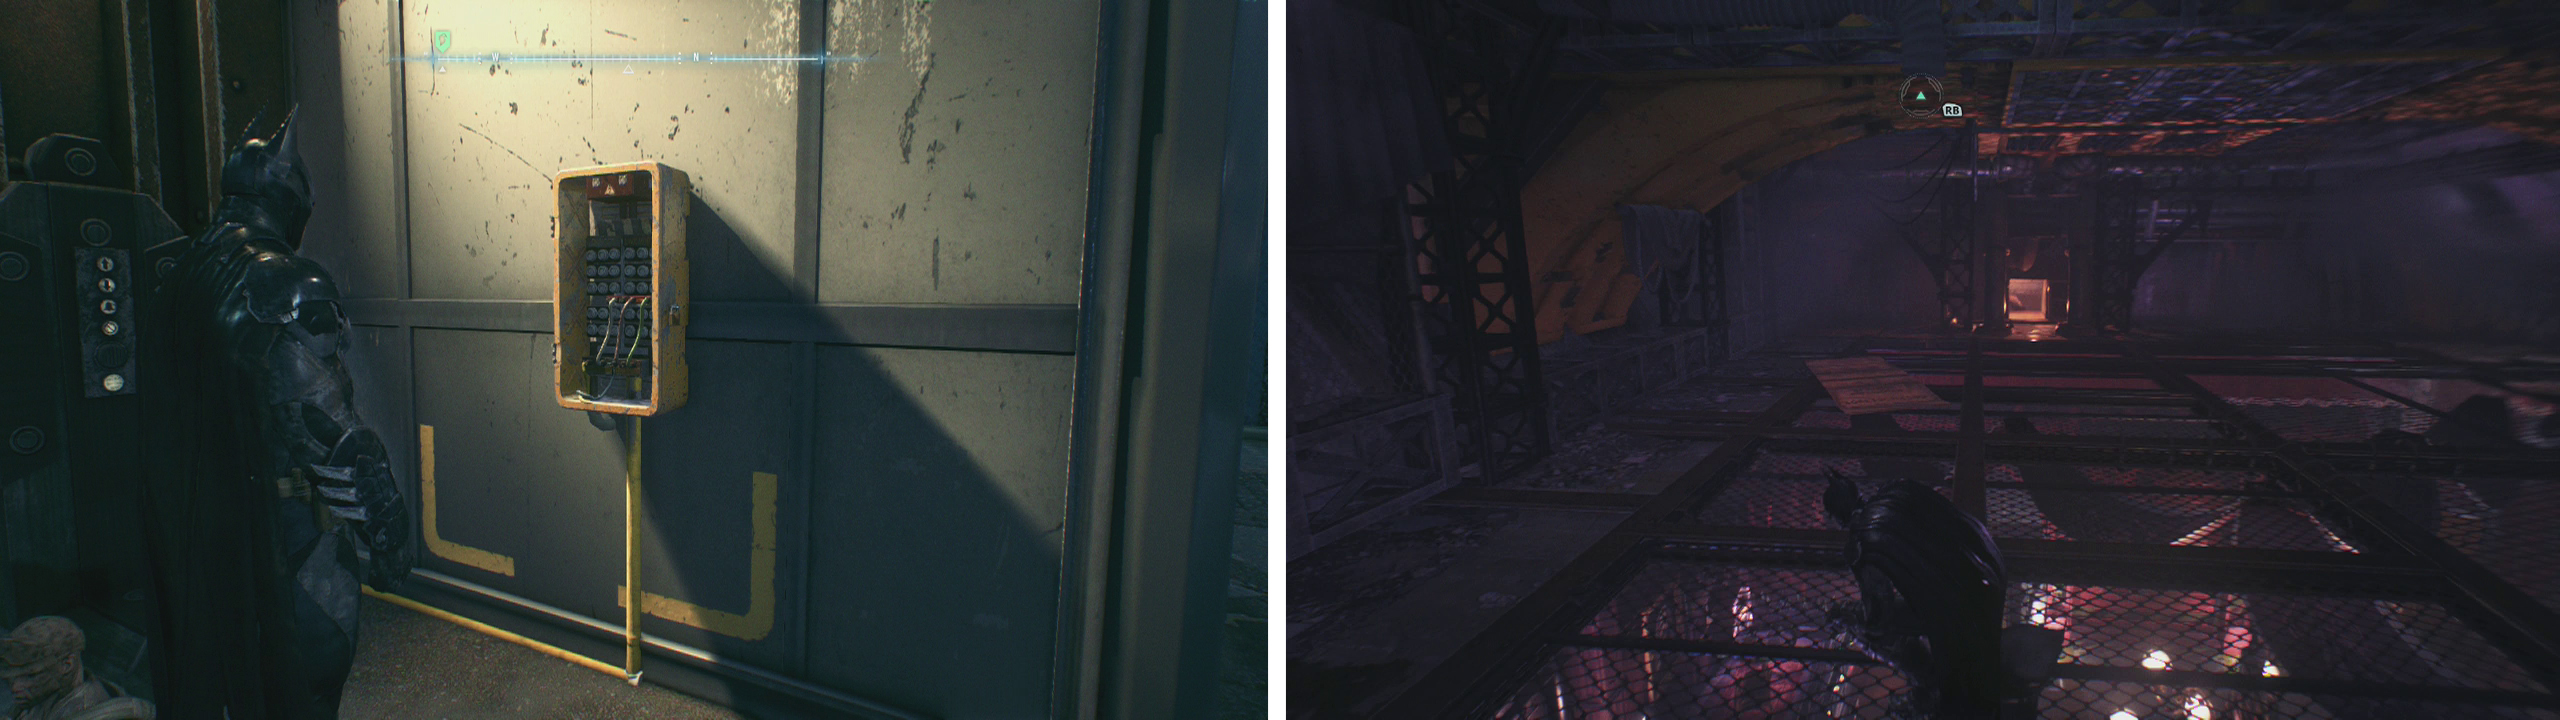 After clearing the roof use the switch to open the elevator (left). Drop through the series of floor hatches to reach the vault room (right).